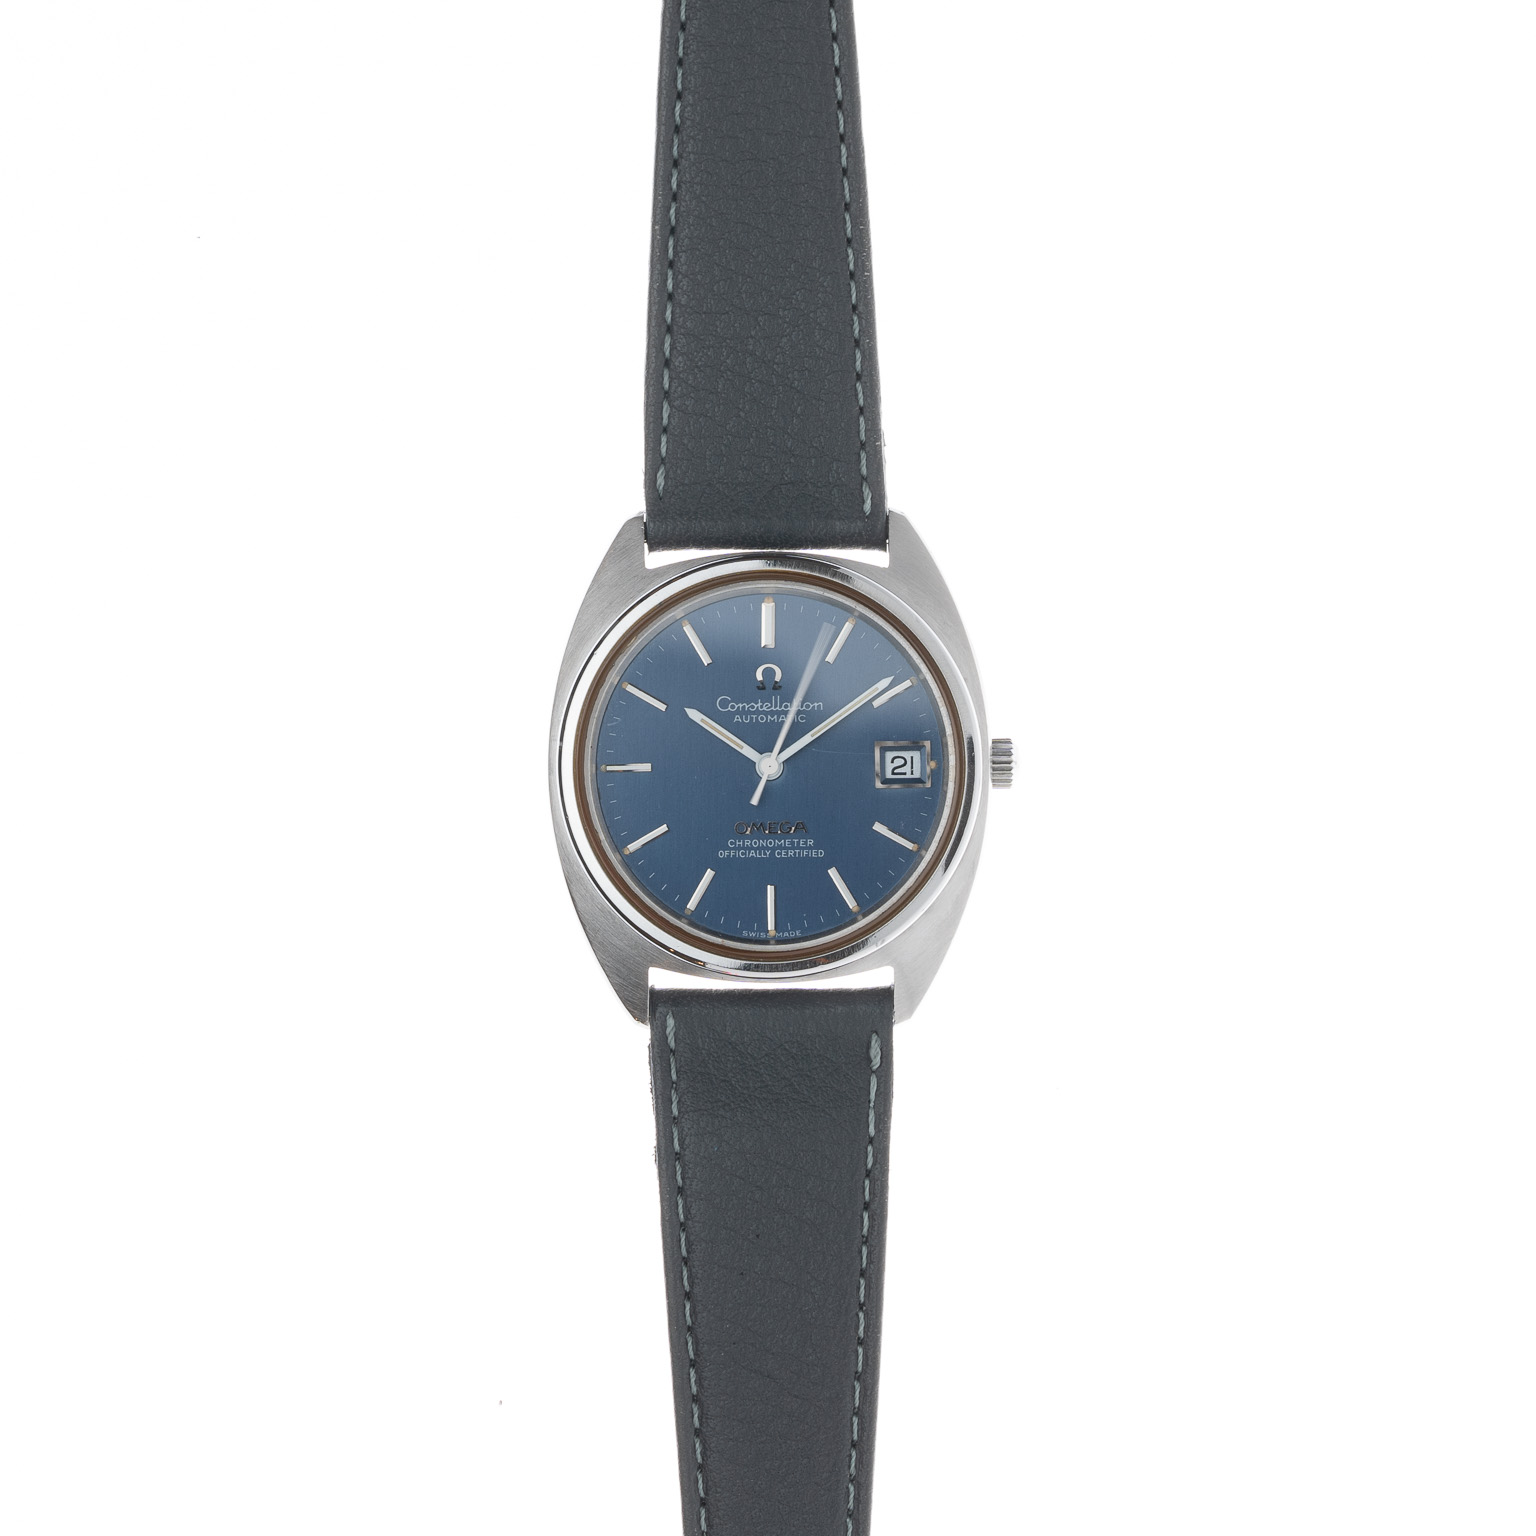 Omega Constellation 168.0056 from 19 watch